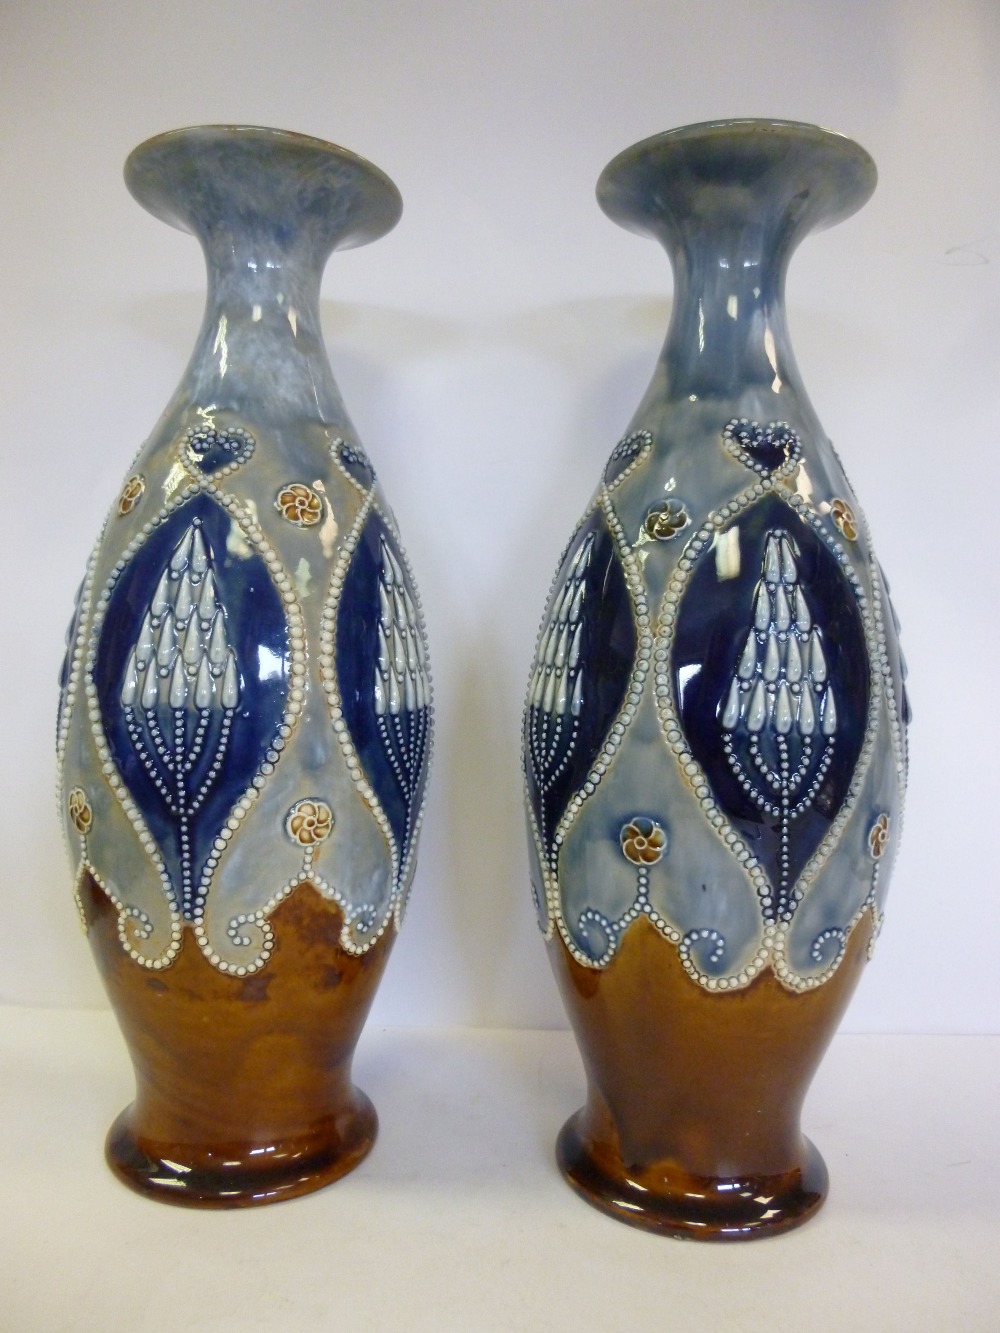 A pair of Royal Doulton brown and blue glazed stoneware vases of ovoid form, having narrow necks